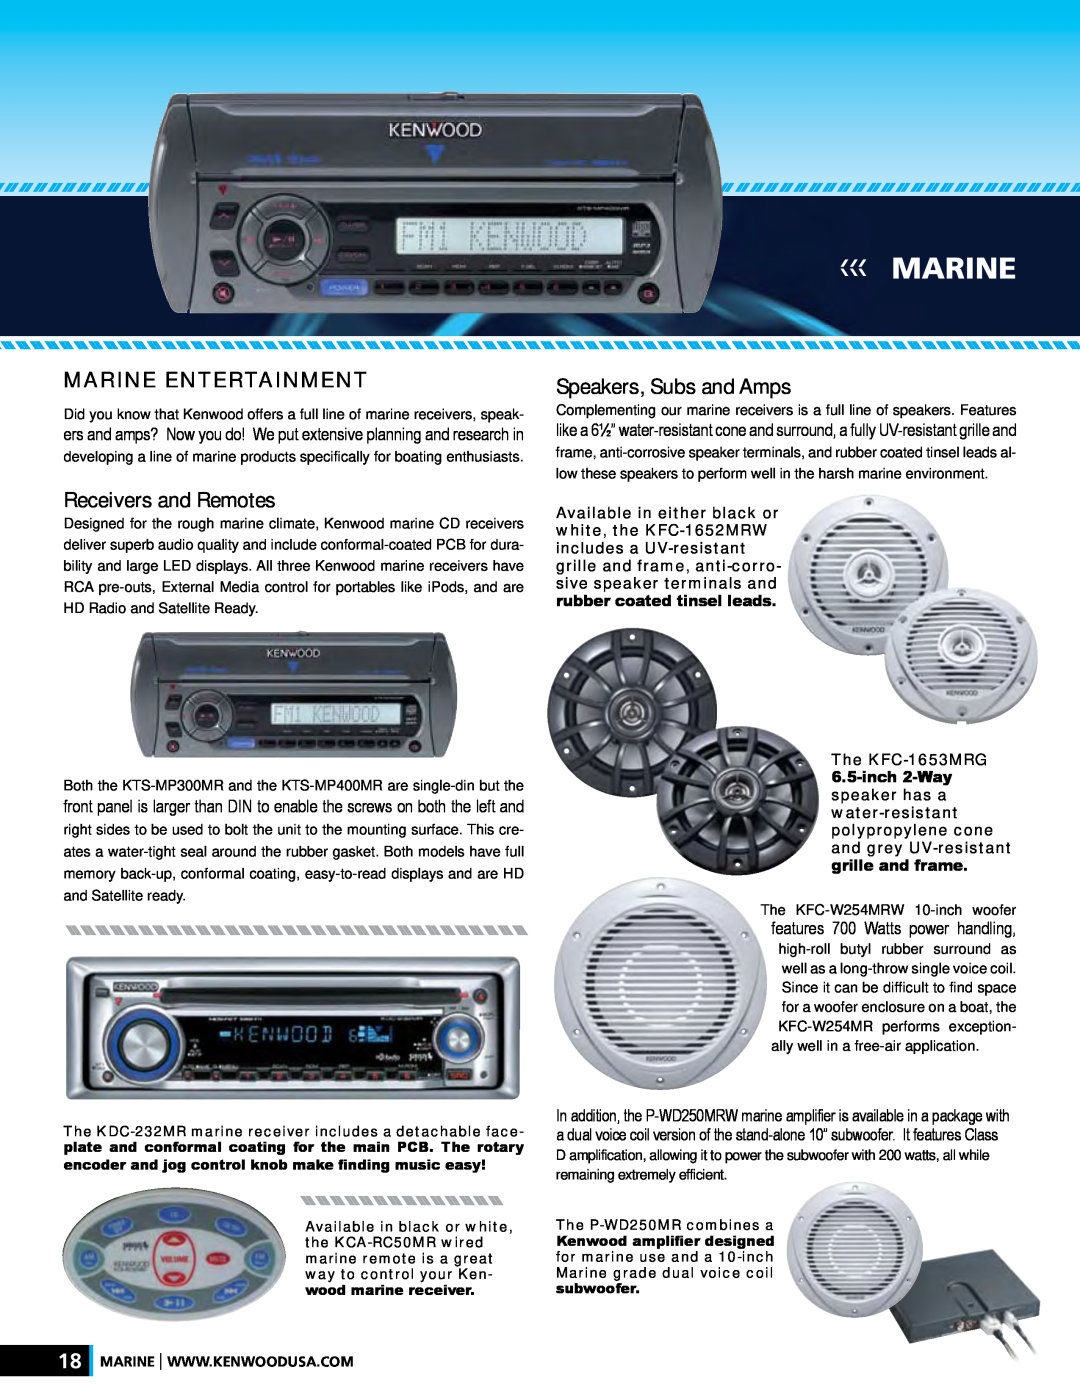 Kenwood XR-S17P manual Receivers and Remotes, Speakers, Subs and Amps, Marine Entertainment 